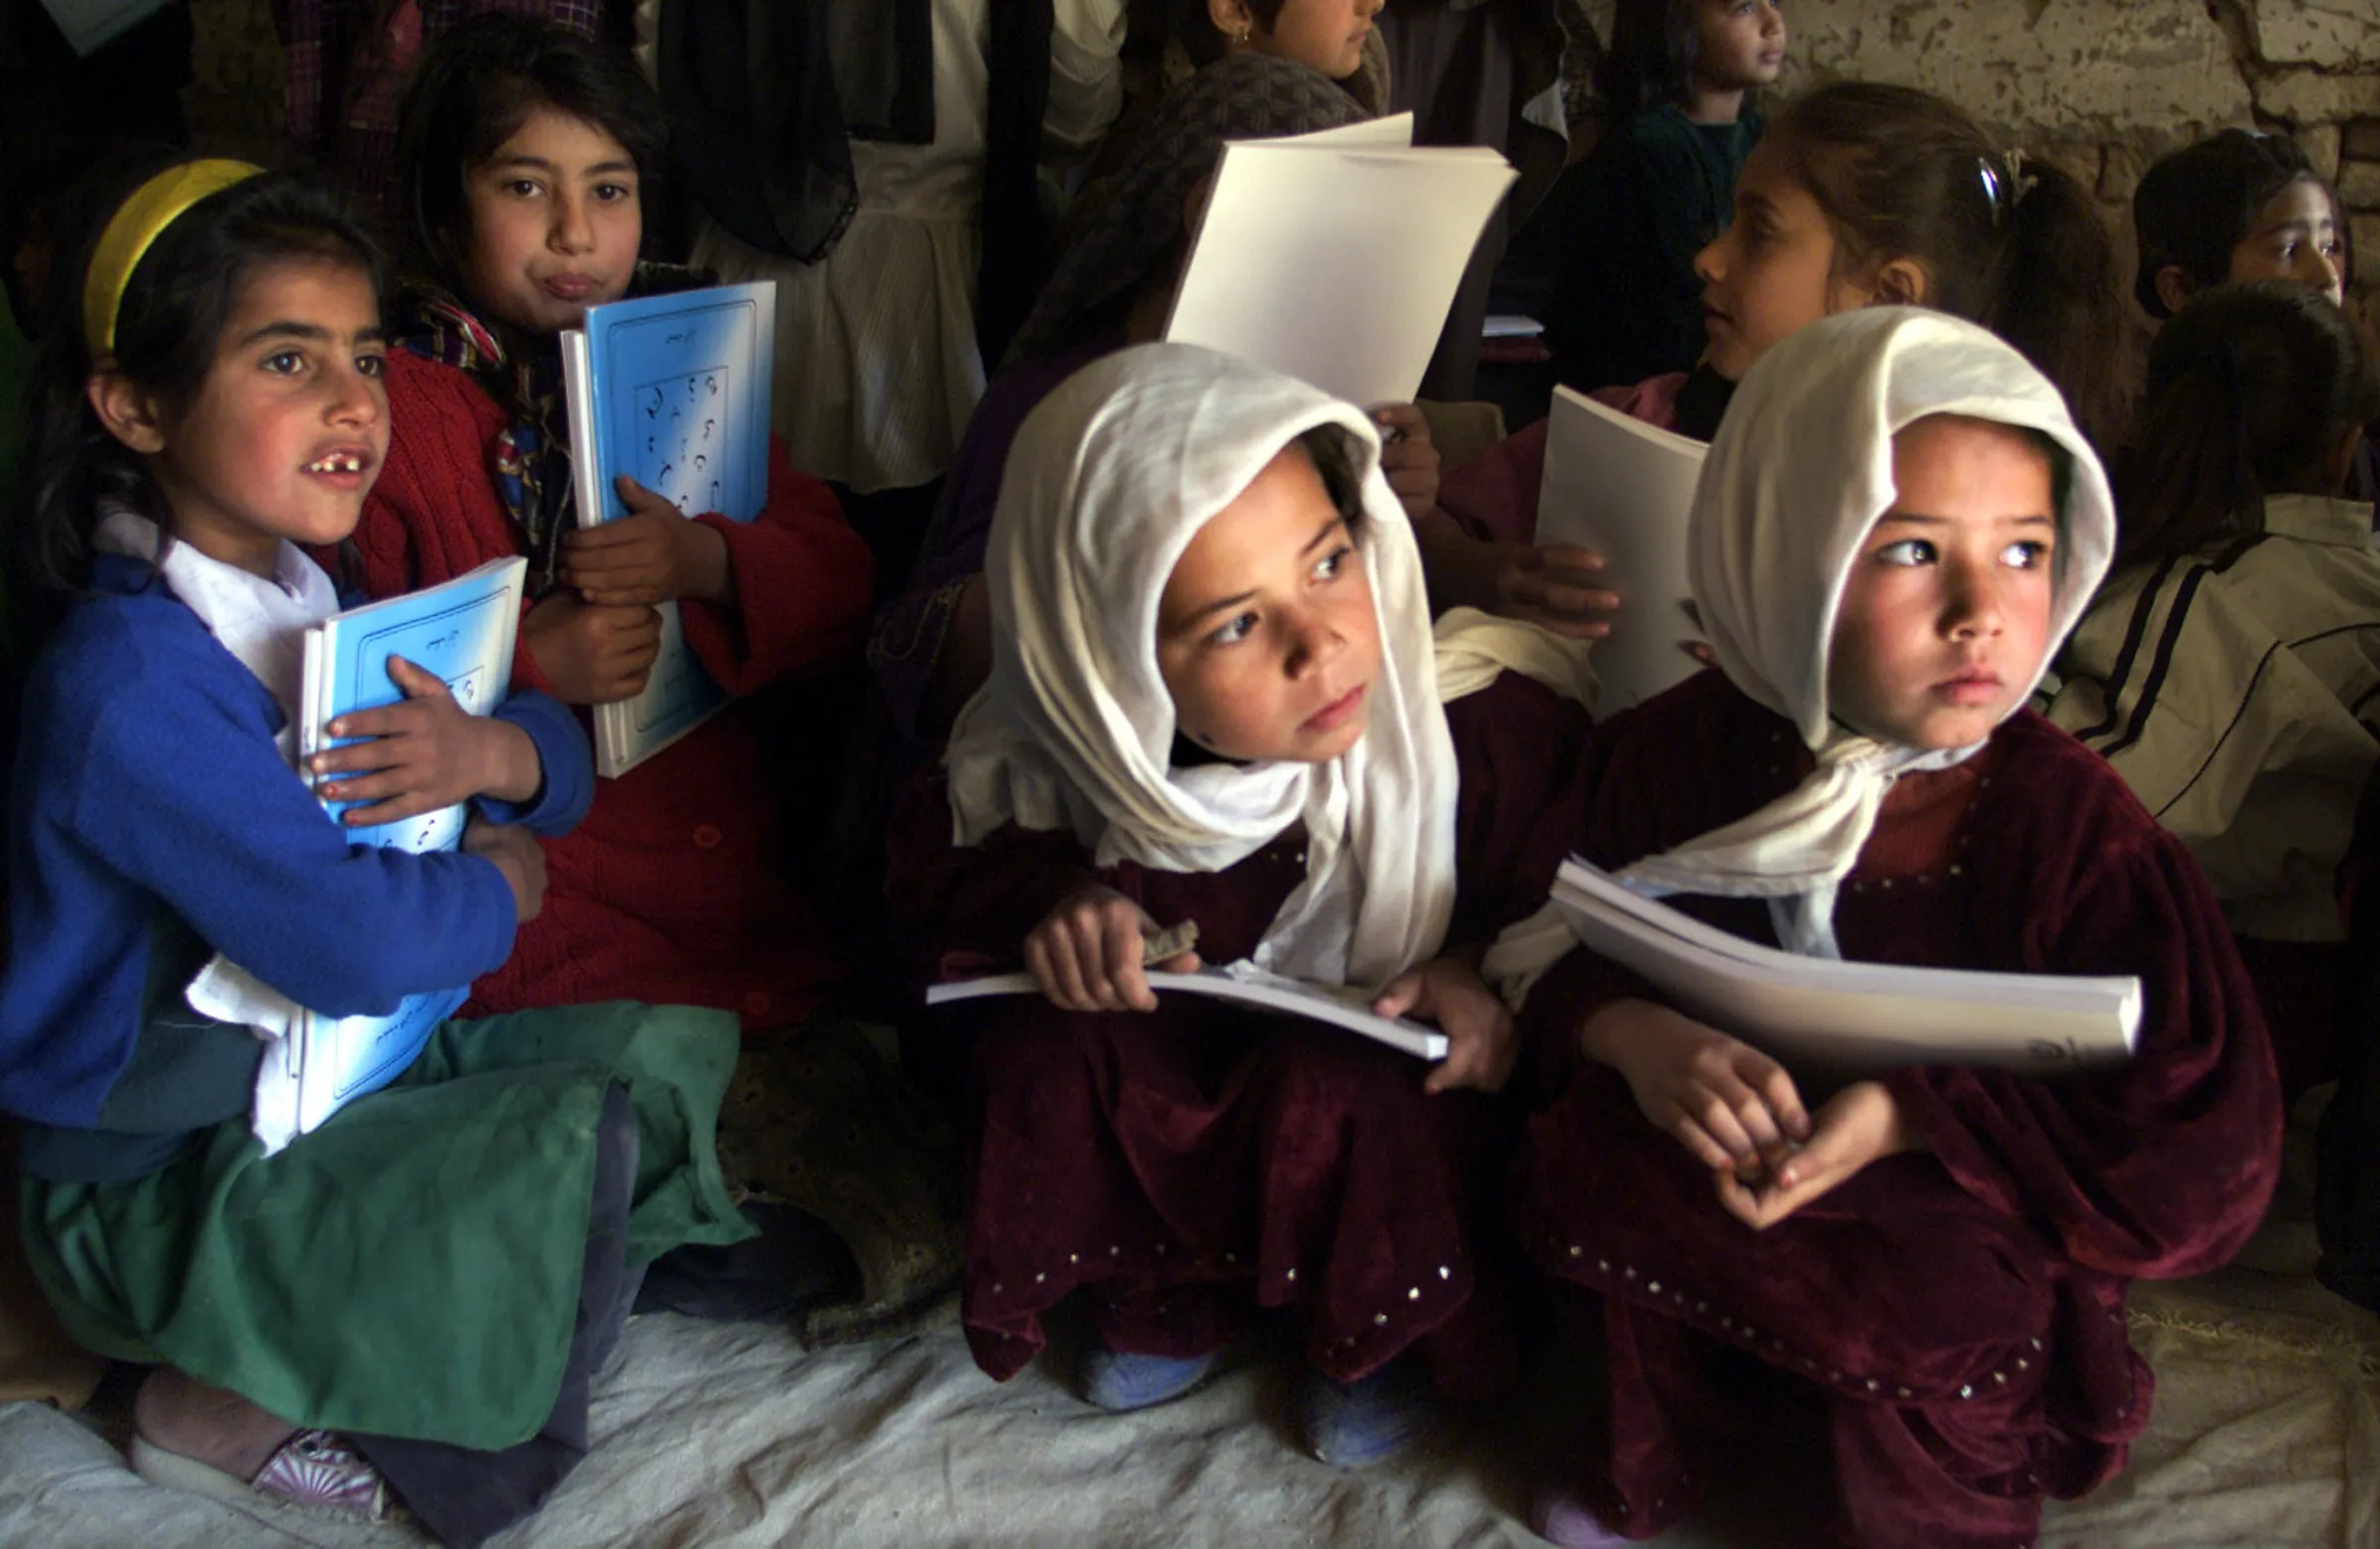 Afghan schoolgirls clutch UNICEF textbooks as school materials are distributed to students in Kabul, March 25, 2002. REUTERS/Jim Hollander